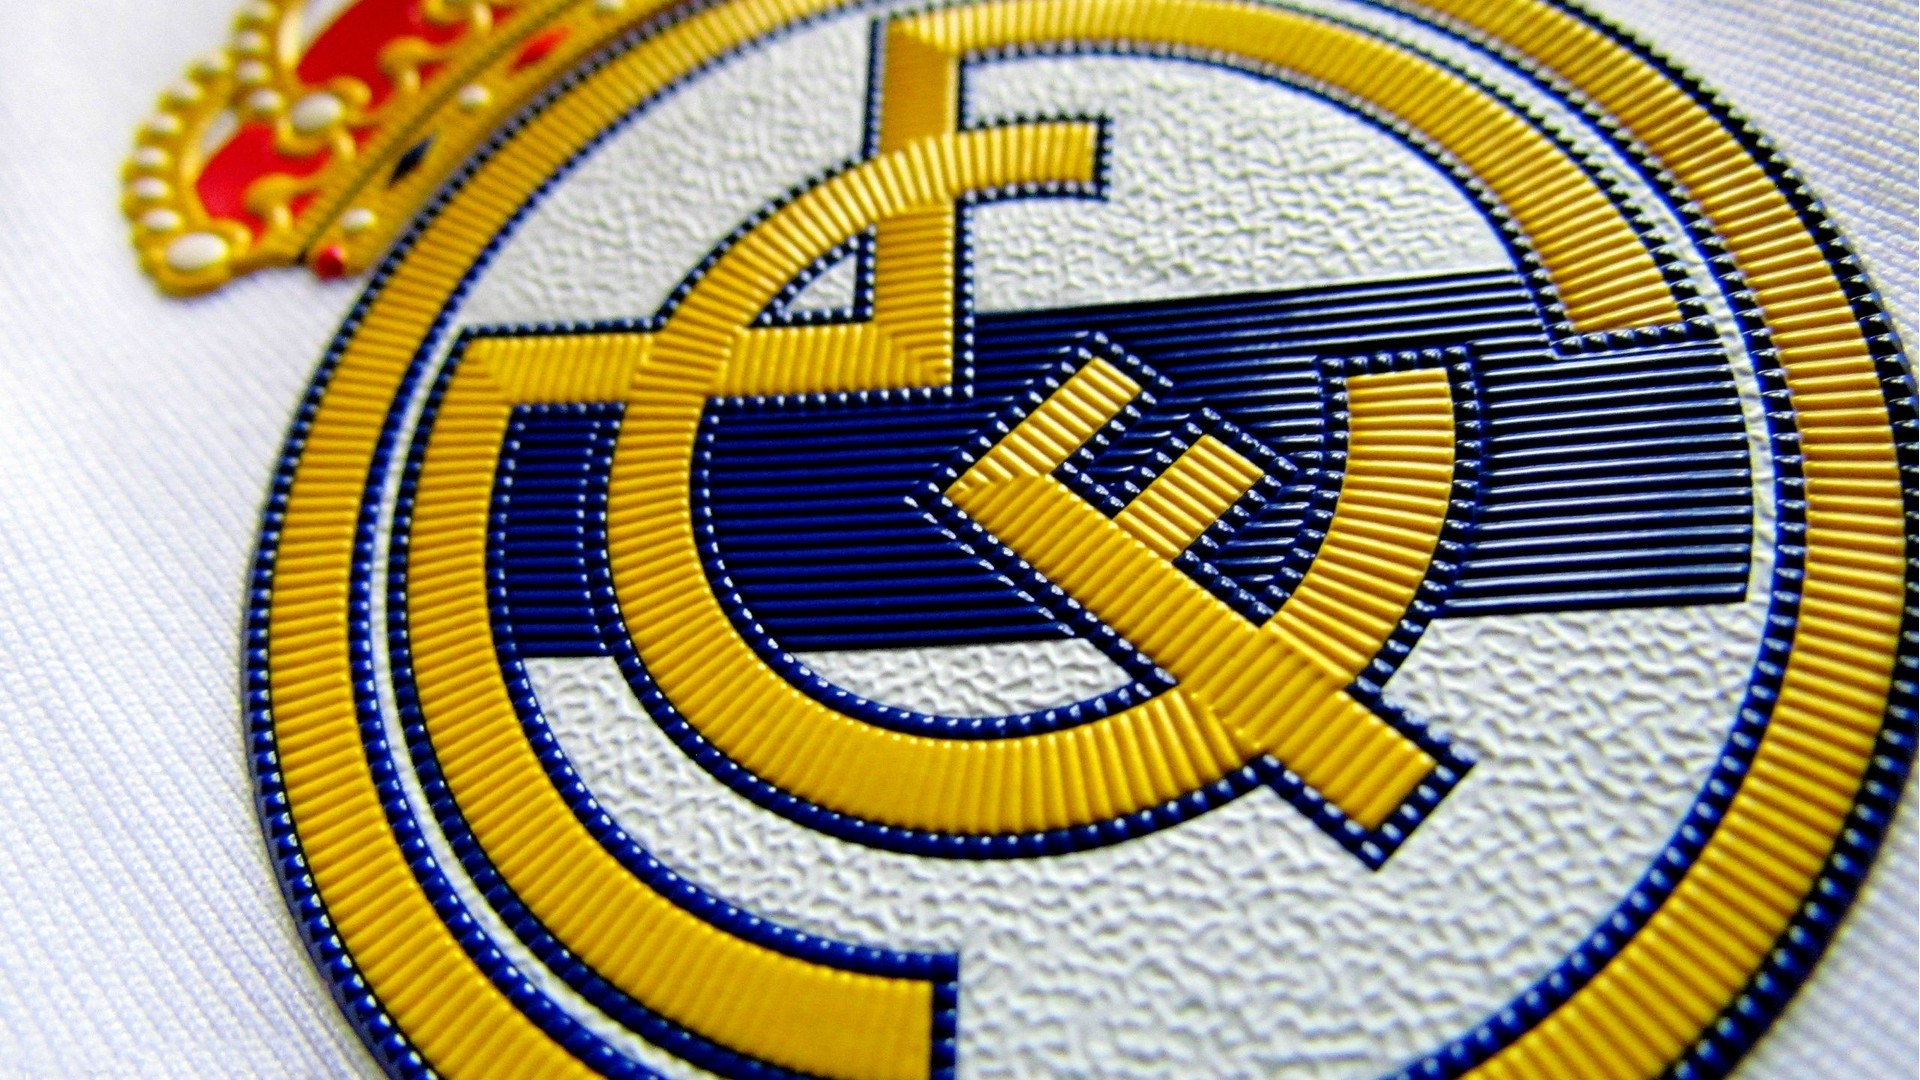 Wallpapers HD Real Madrid CF With Resolution 1920X1080 pixel. You can make this wallpaper for your Mac or Windows Desktop Background, iPhone, Android or Tablet and another Smartphone device for free